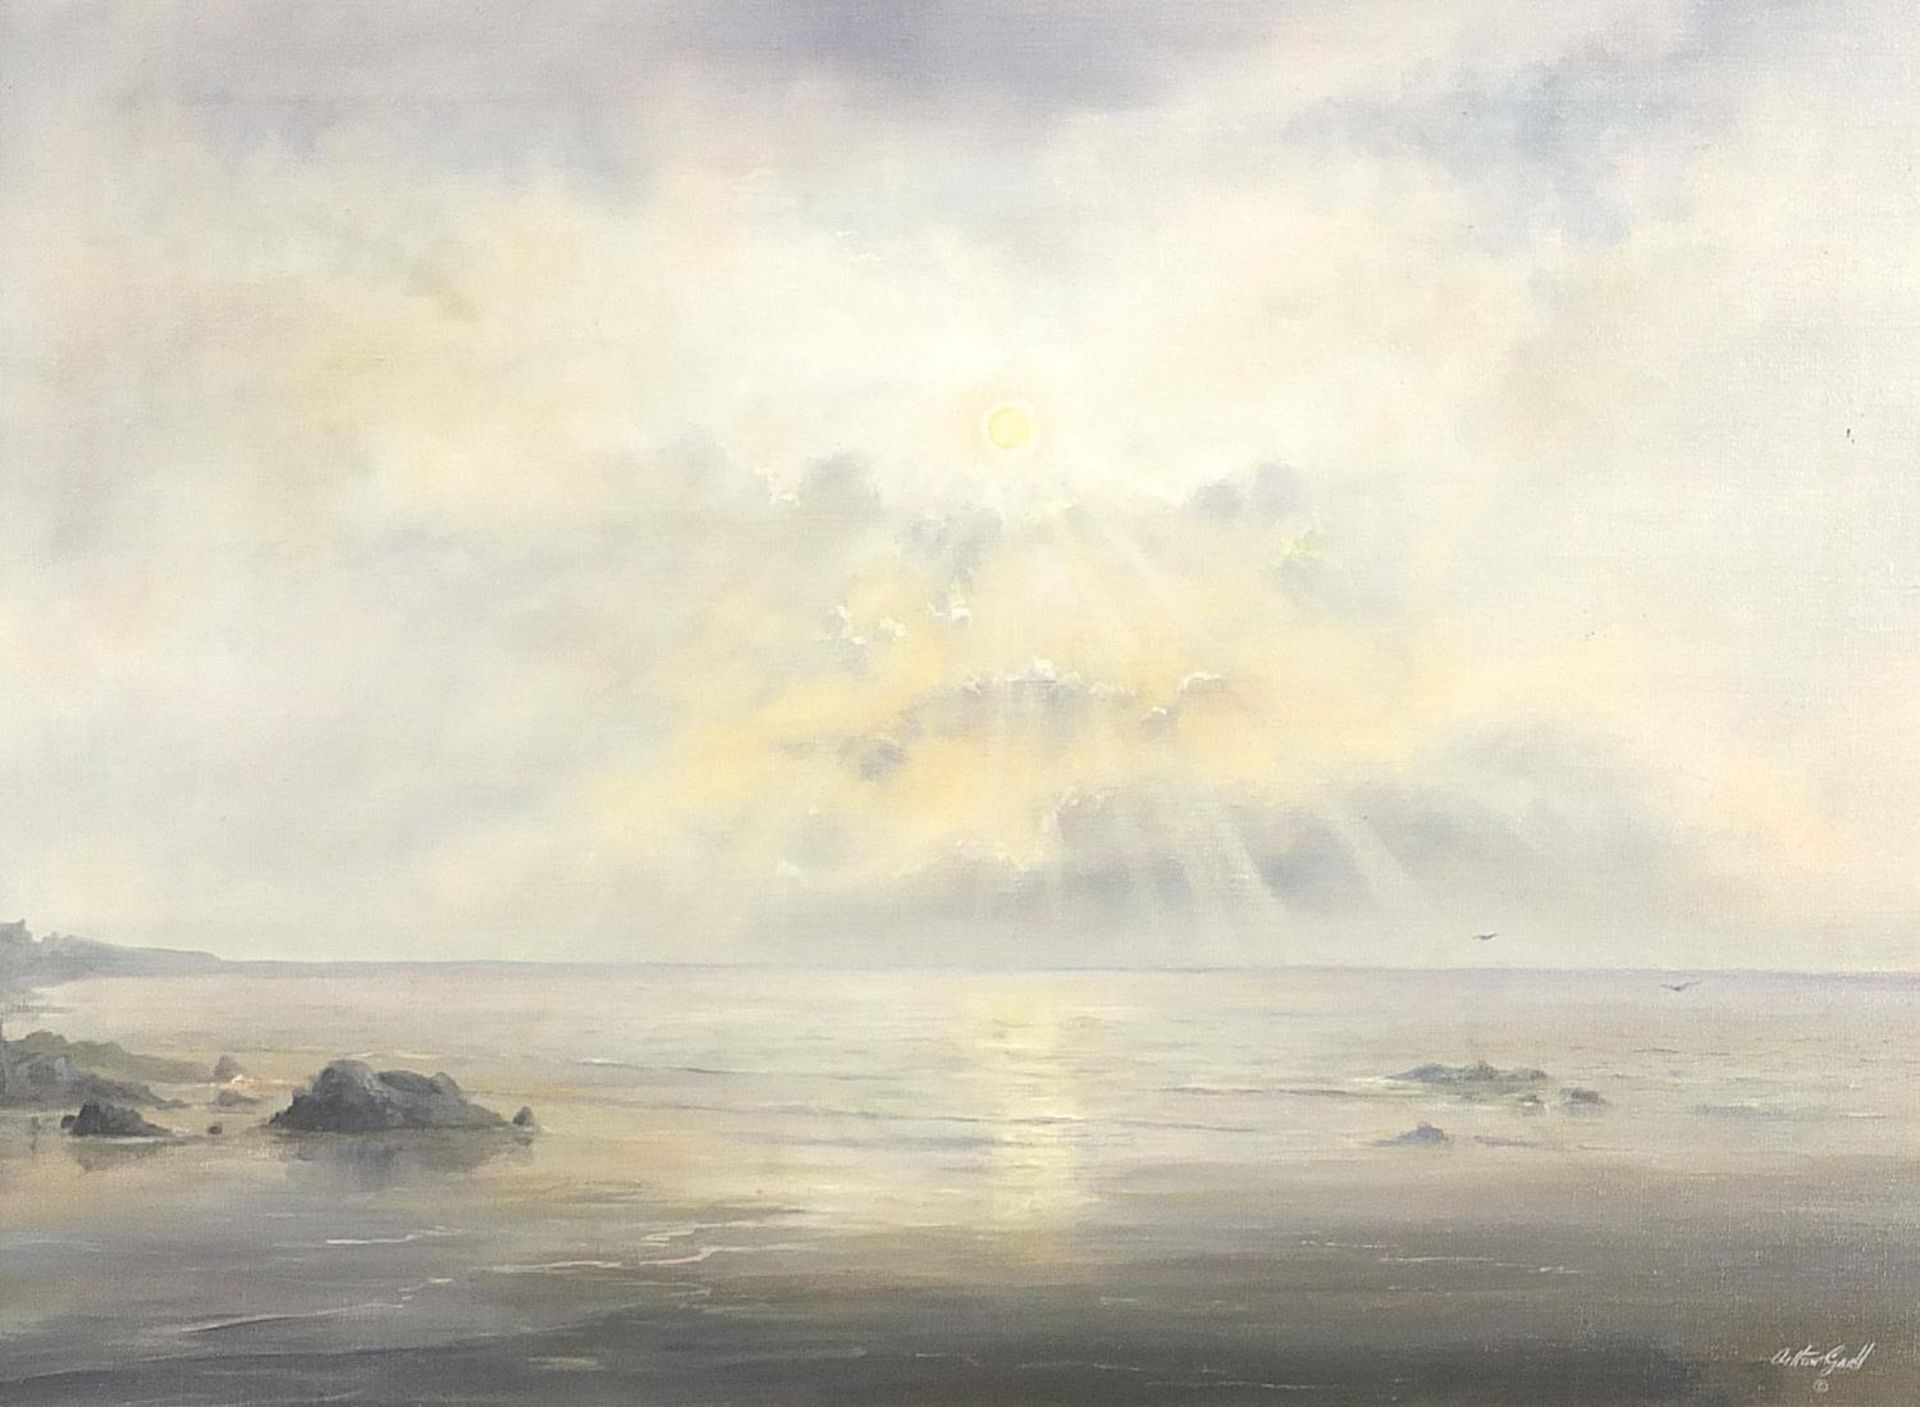 Arthur Gadd - The tranquil shore, oil on canvas, mounted and framed, 55cm x 39cm excluding the mount